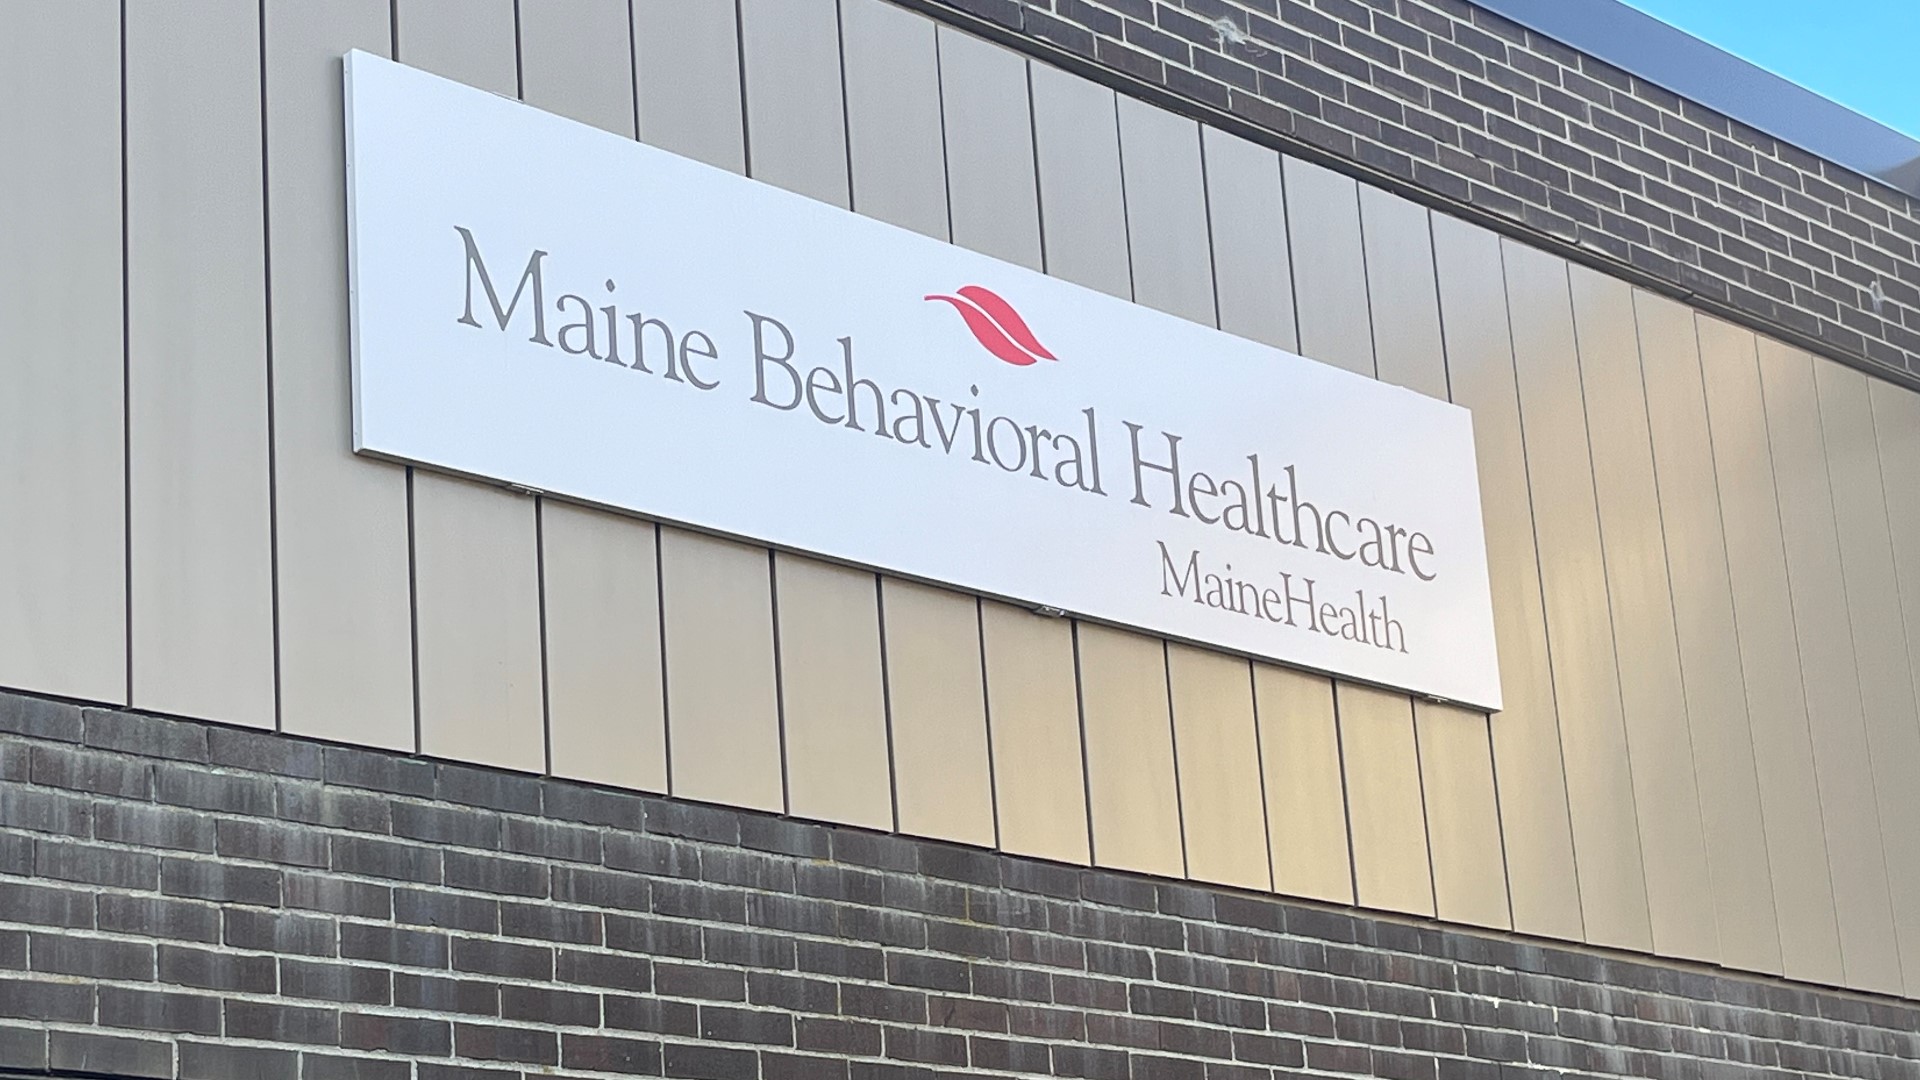 Maine Behavioral Healthcare is training providers to serve patients struggling with mental health.